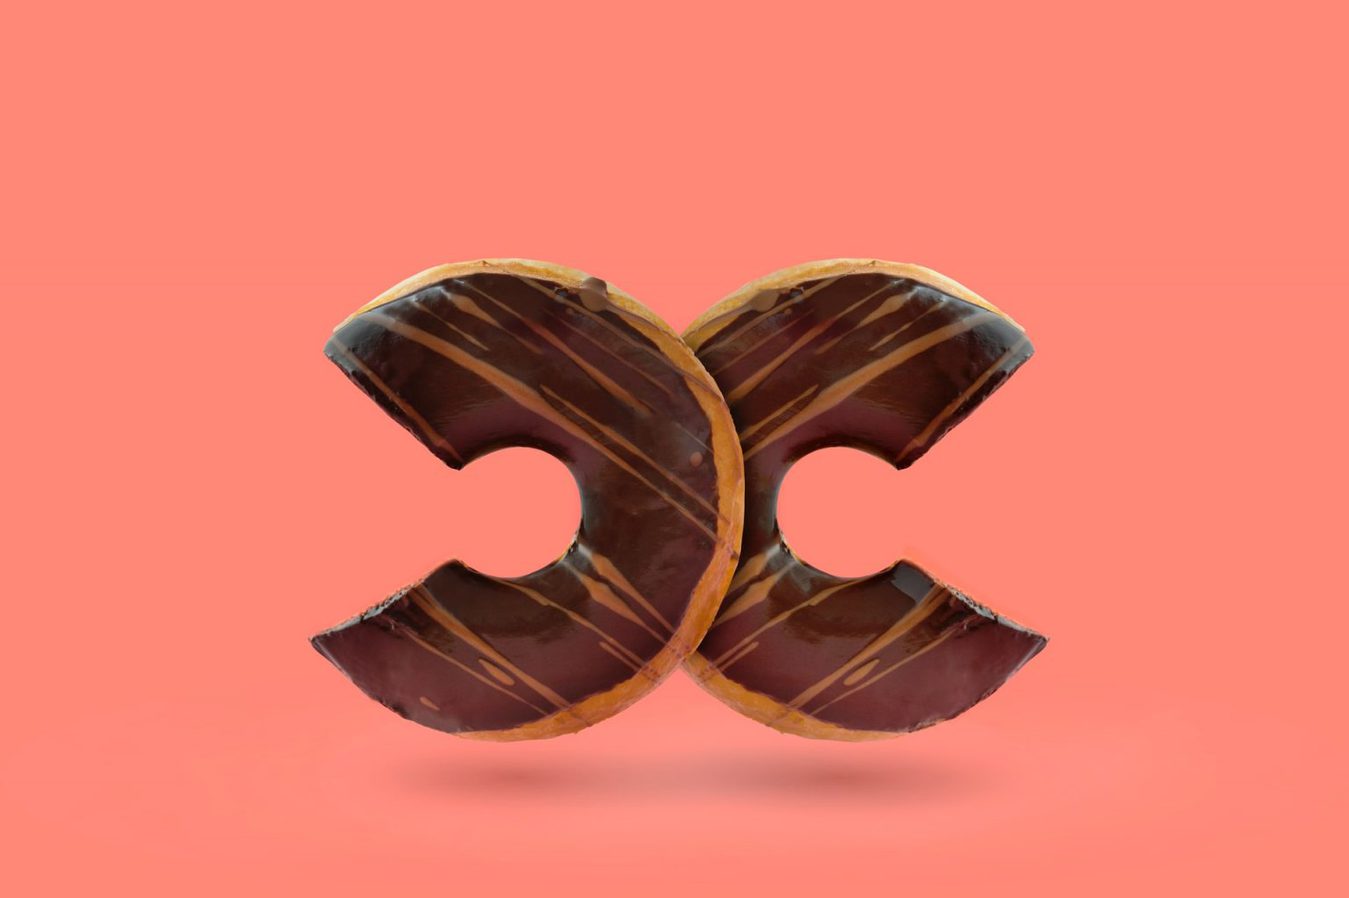 Chanel logo made from donuts